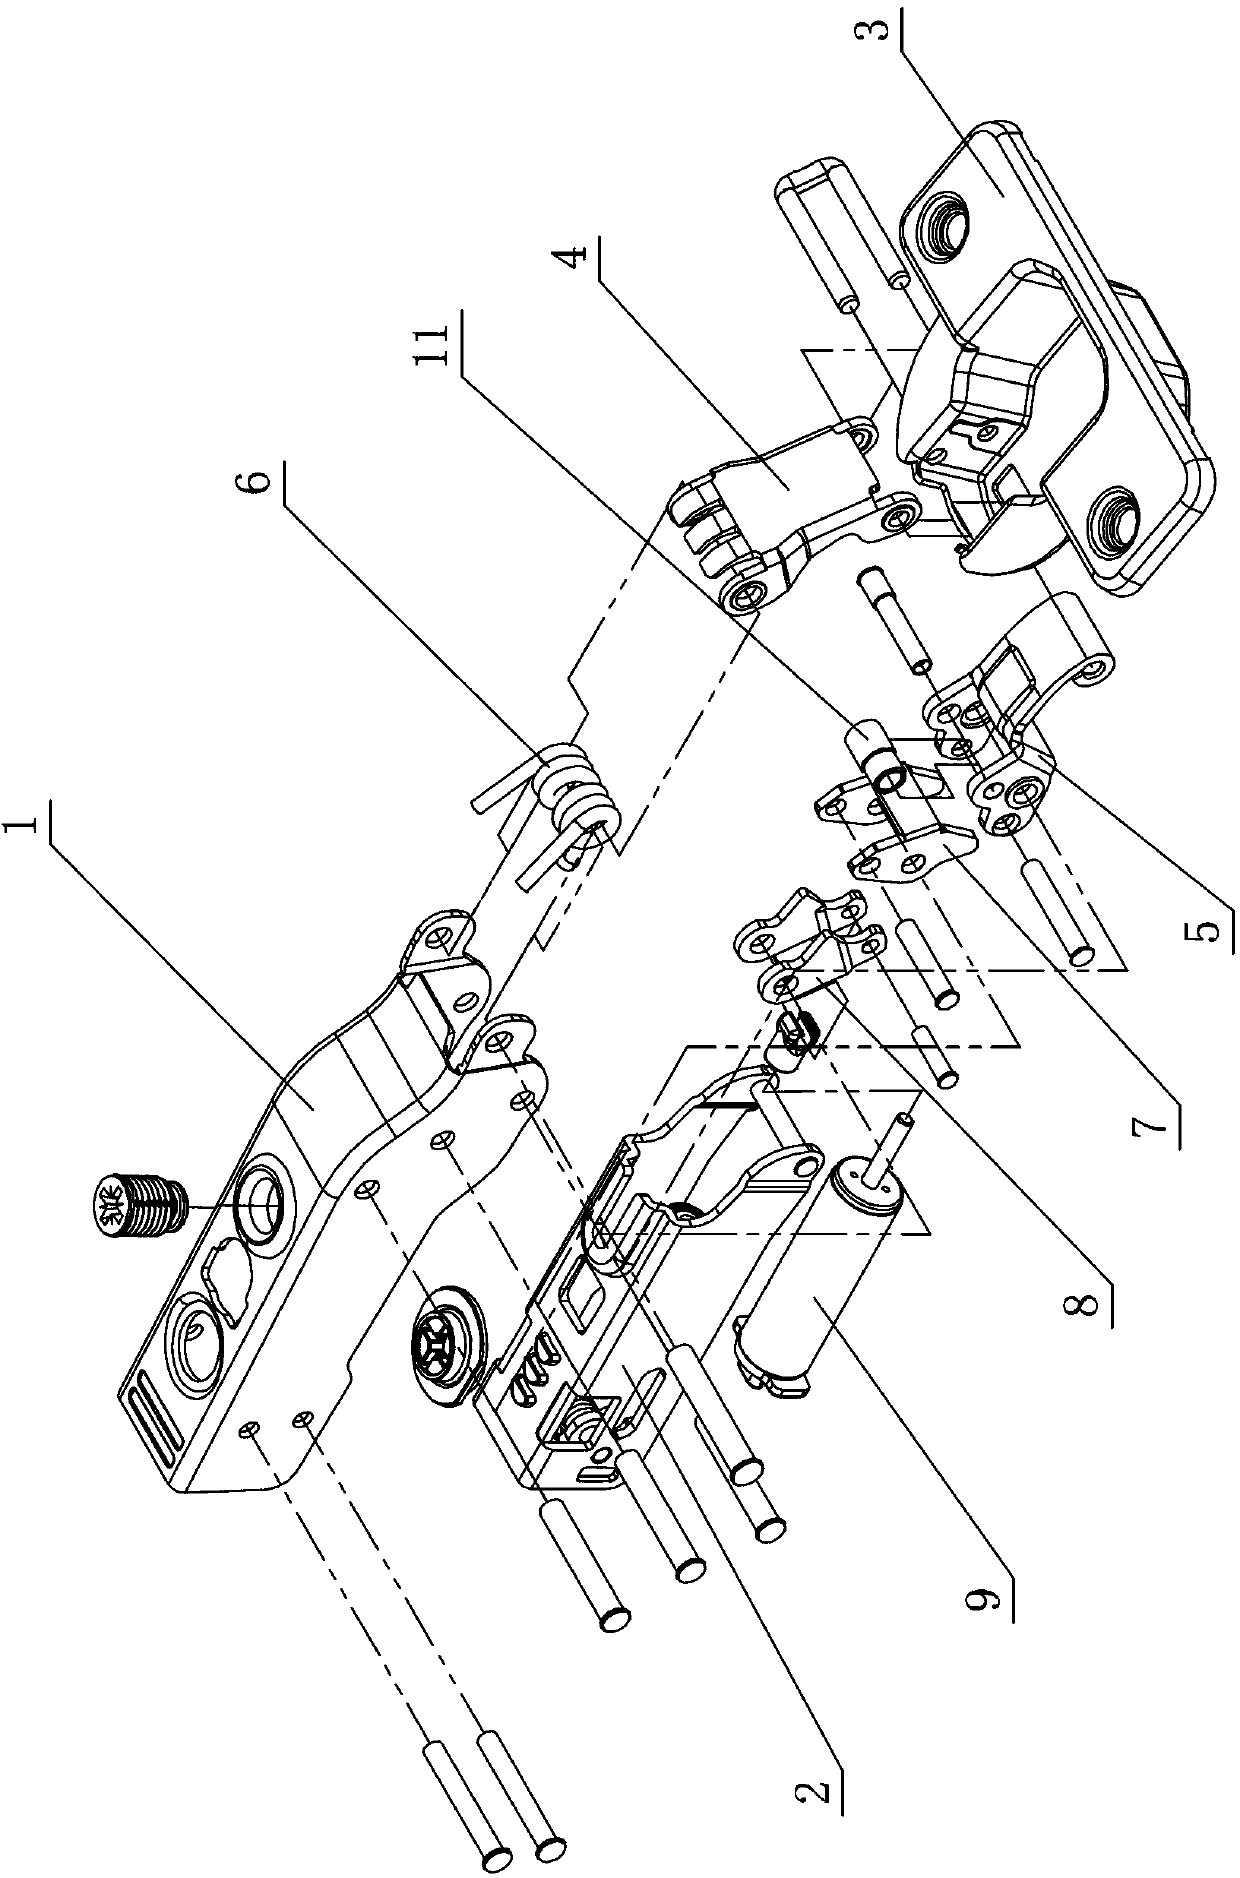 Driving device used for hinge and capable of adjusting arm of force by rotating around shaft